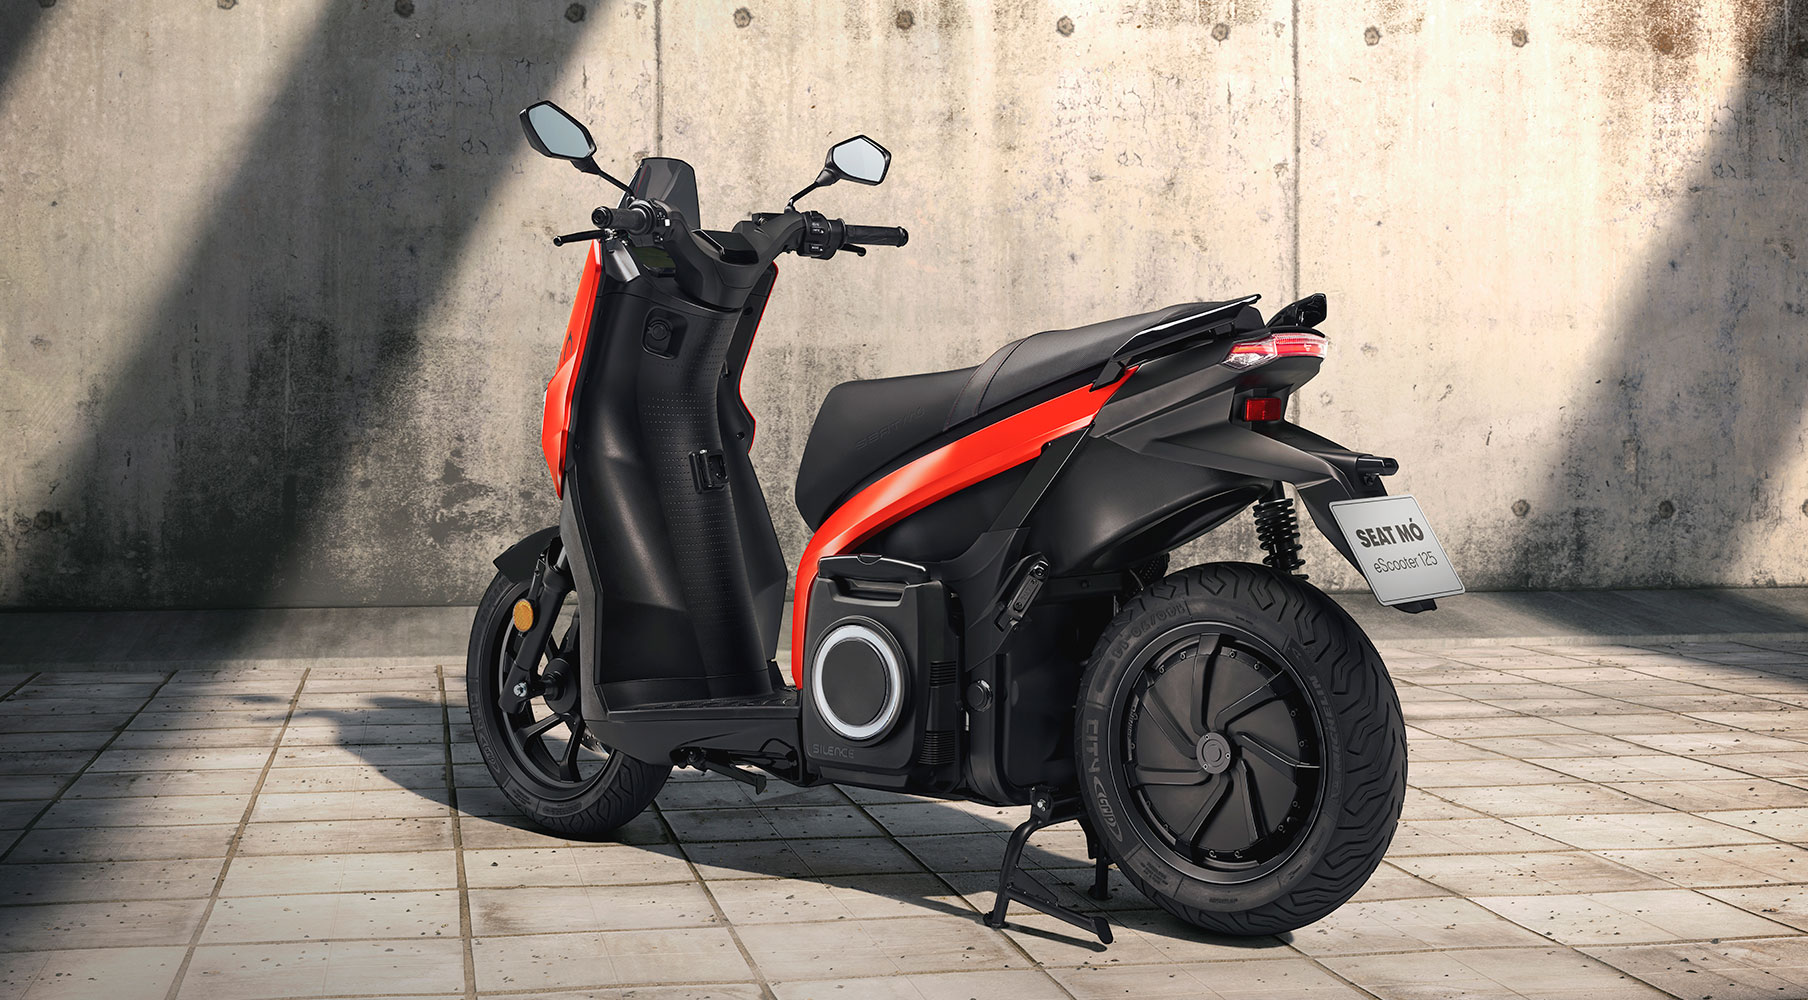 The SEAT MÓ electric motorcycle